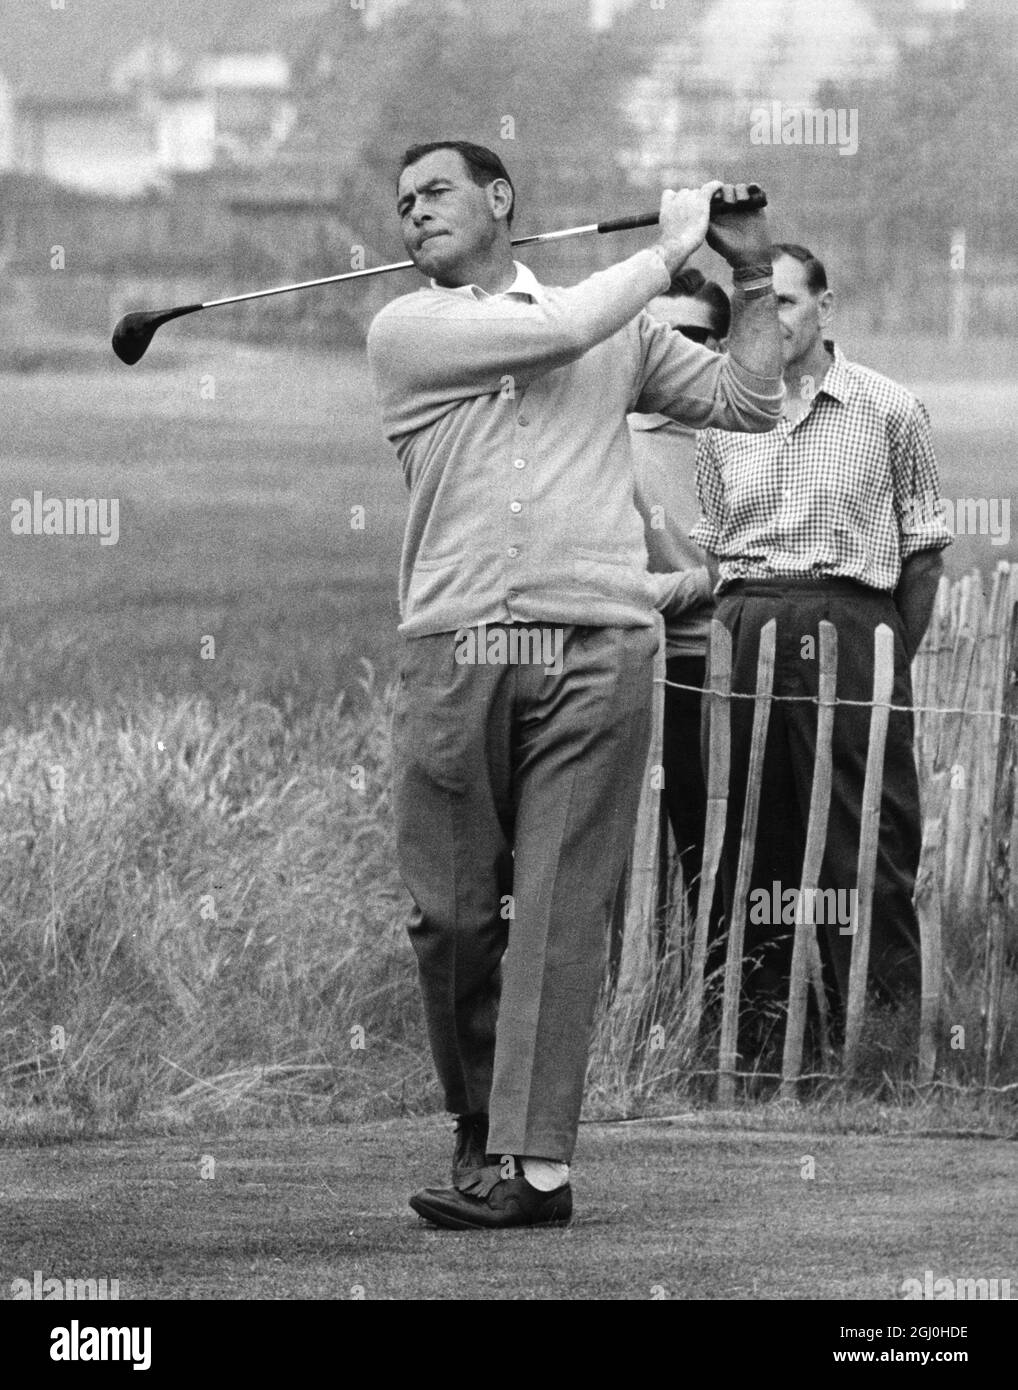 Irishman Christy O'Connor overcame a troublesome ankle injury for a fine score of 70 in the first round of the Open Golf Championships at Hoylake. Photo shows O'Connor driving from the second tee at Hoylake today - 12th July 1967 - ©TopFoto Stock Photo